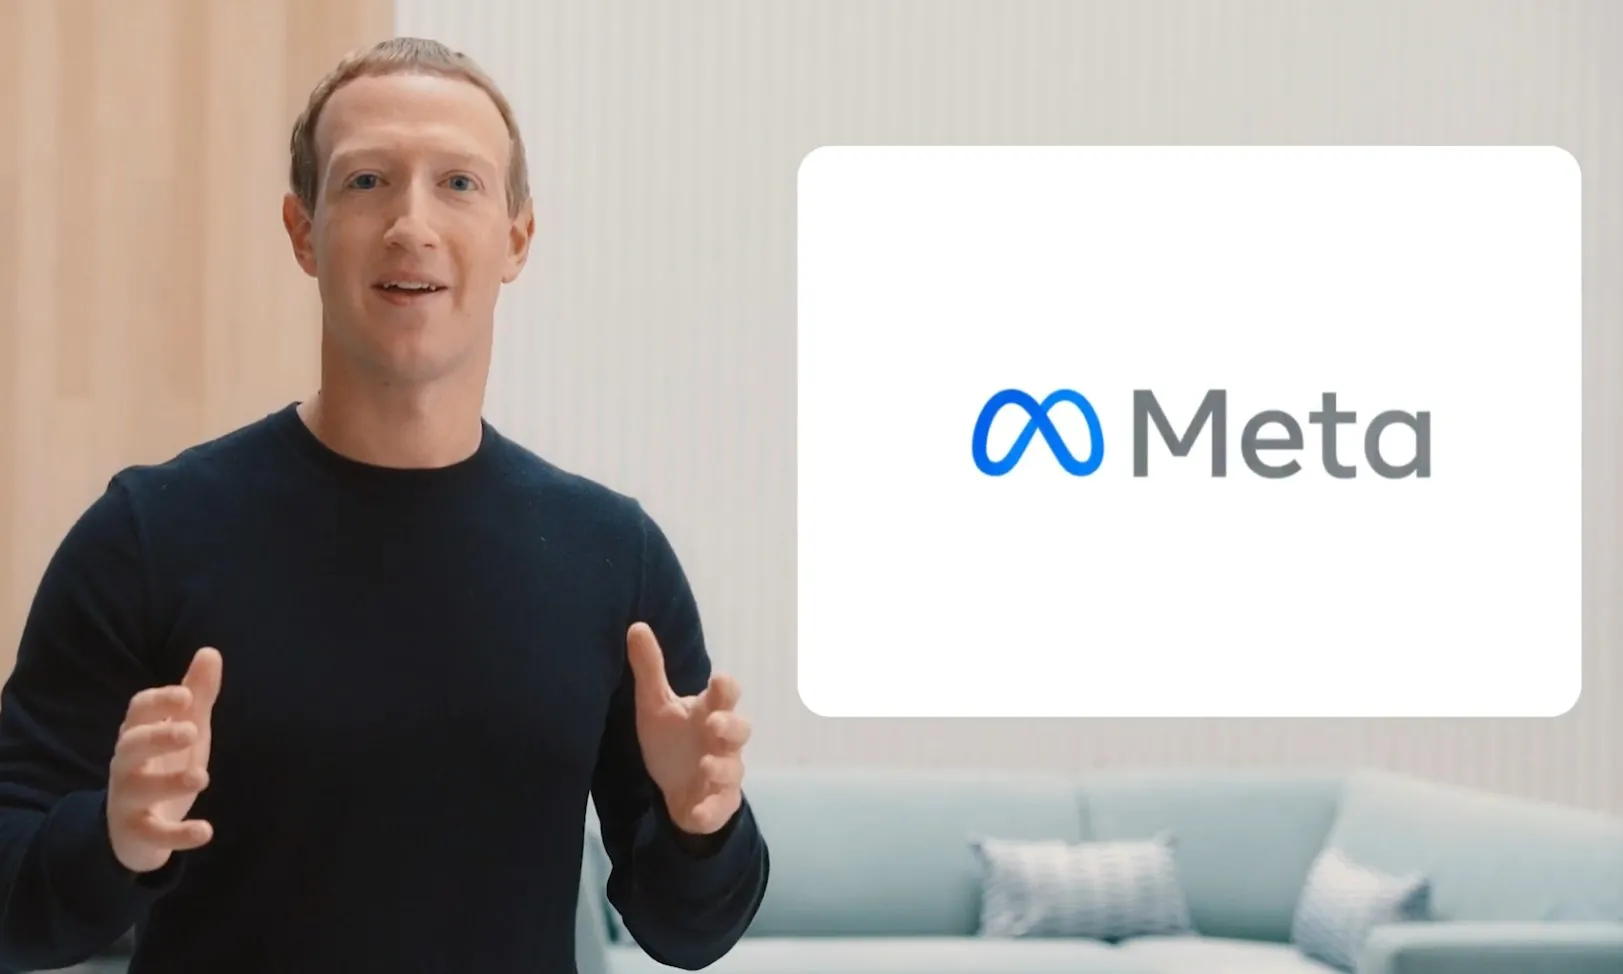 Facebook will now be called Meta